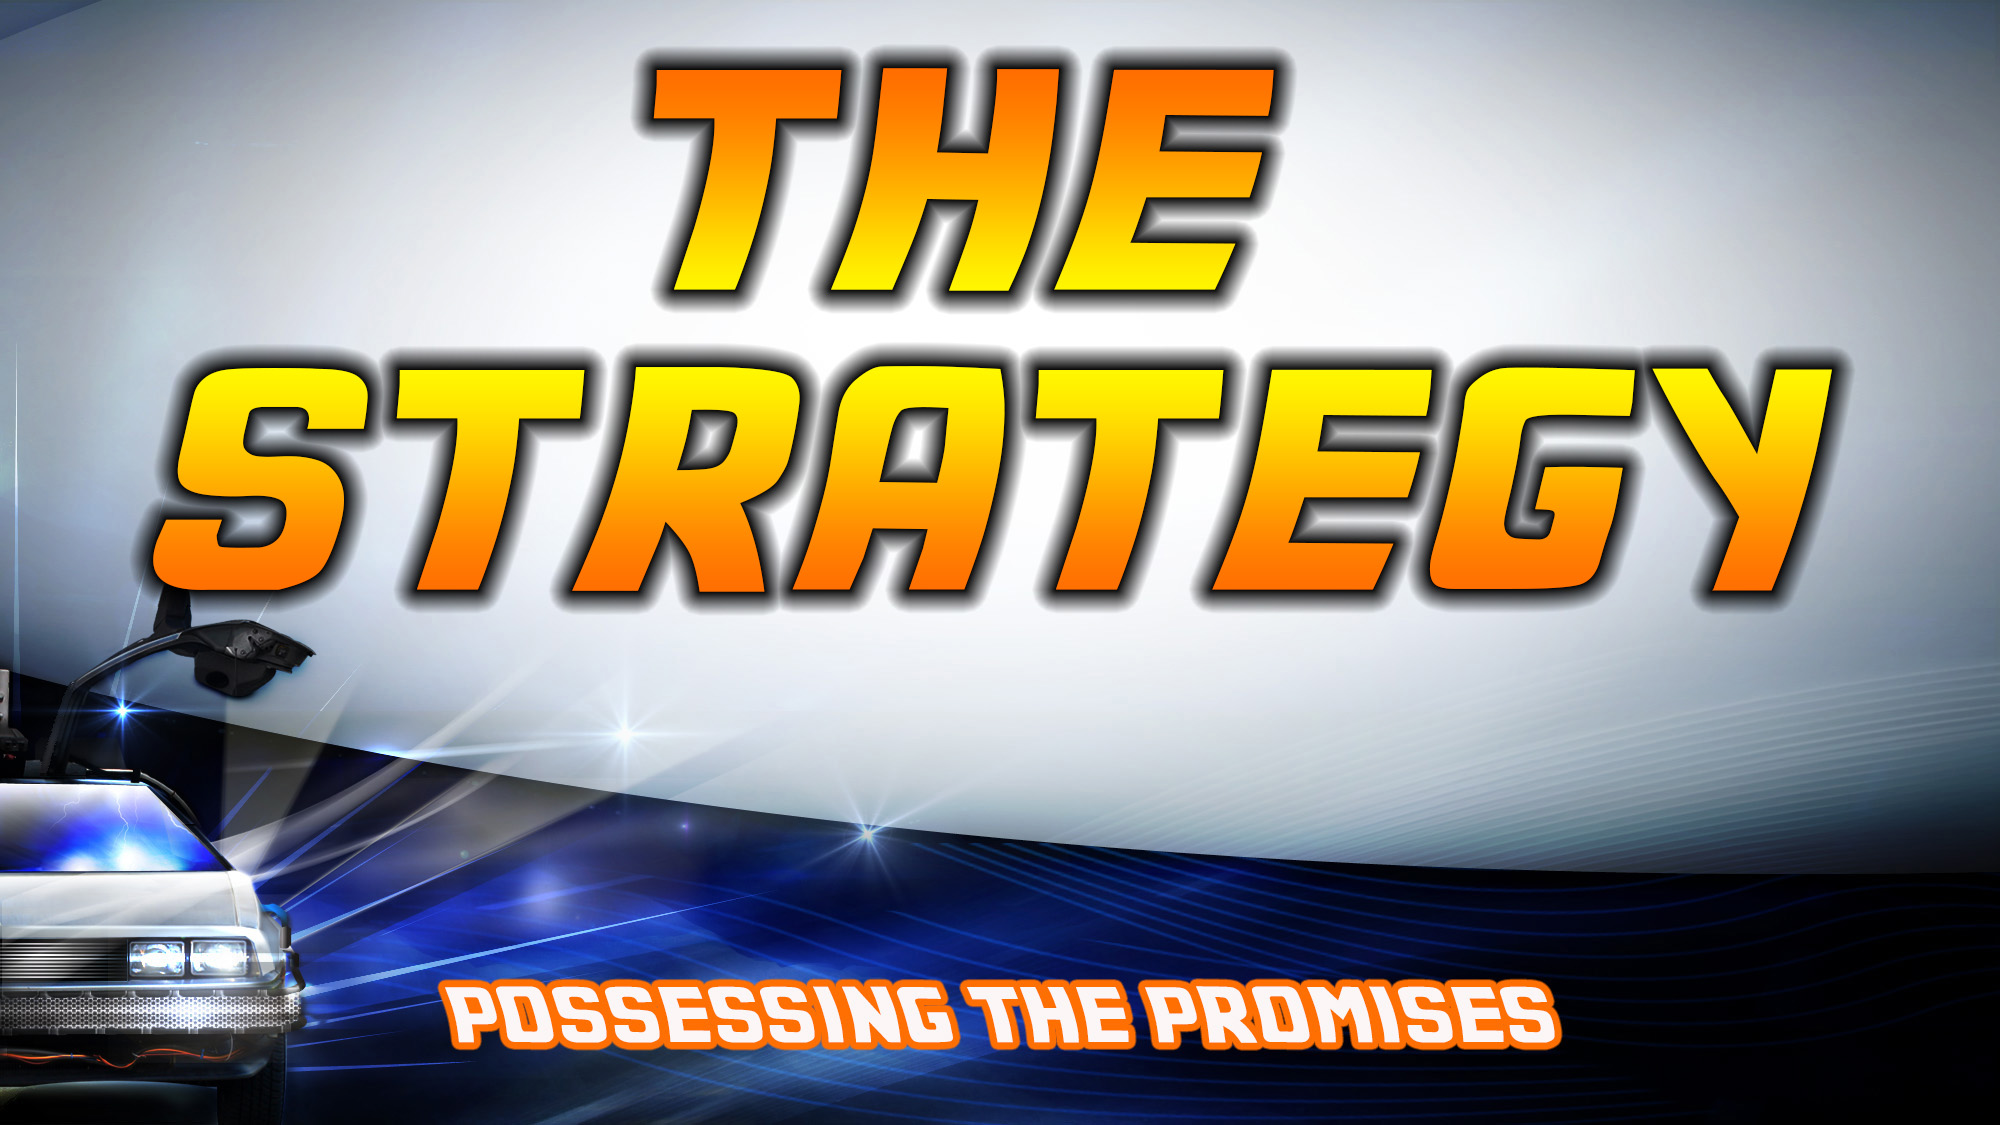 Pastor Huey: Back To The Future - Possessing The Promises | The Strategy (12/27/15)